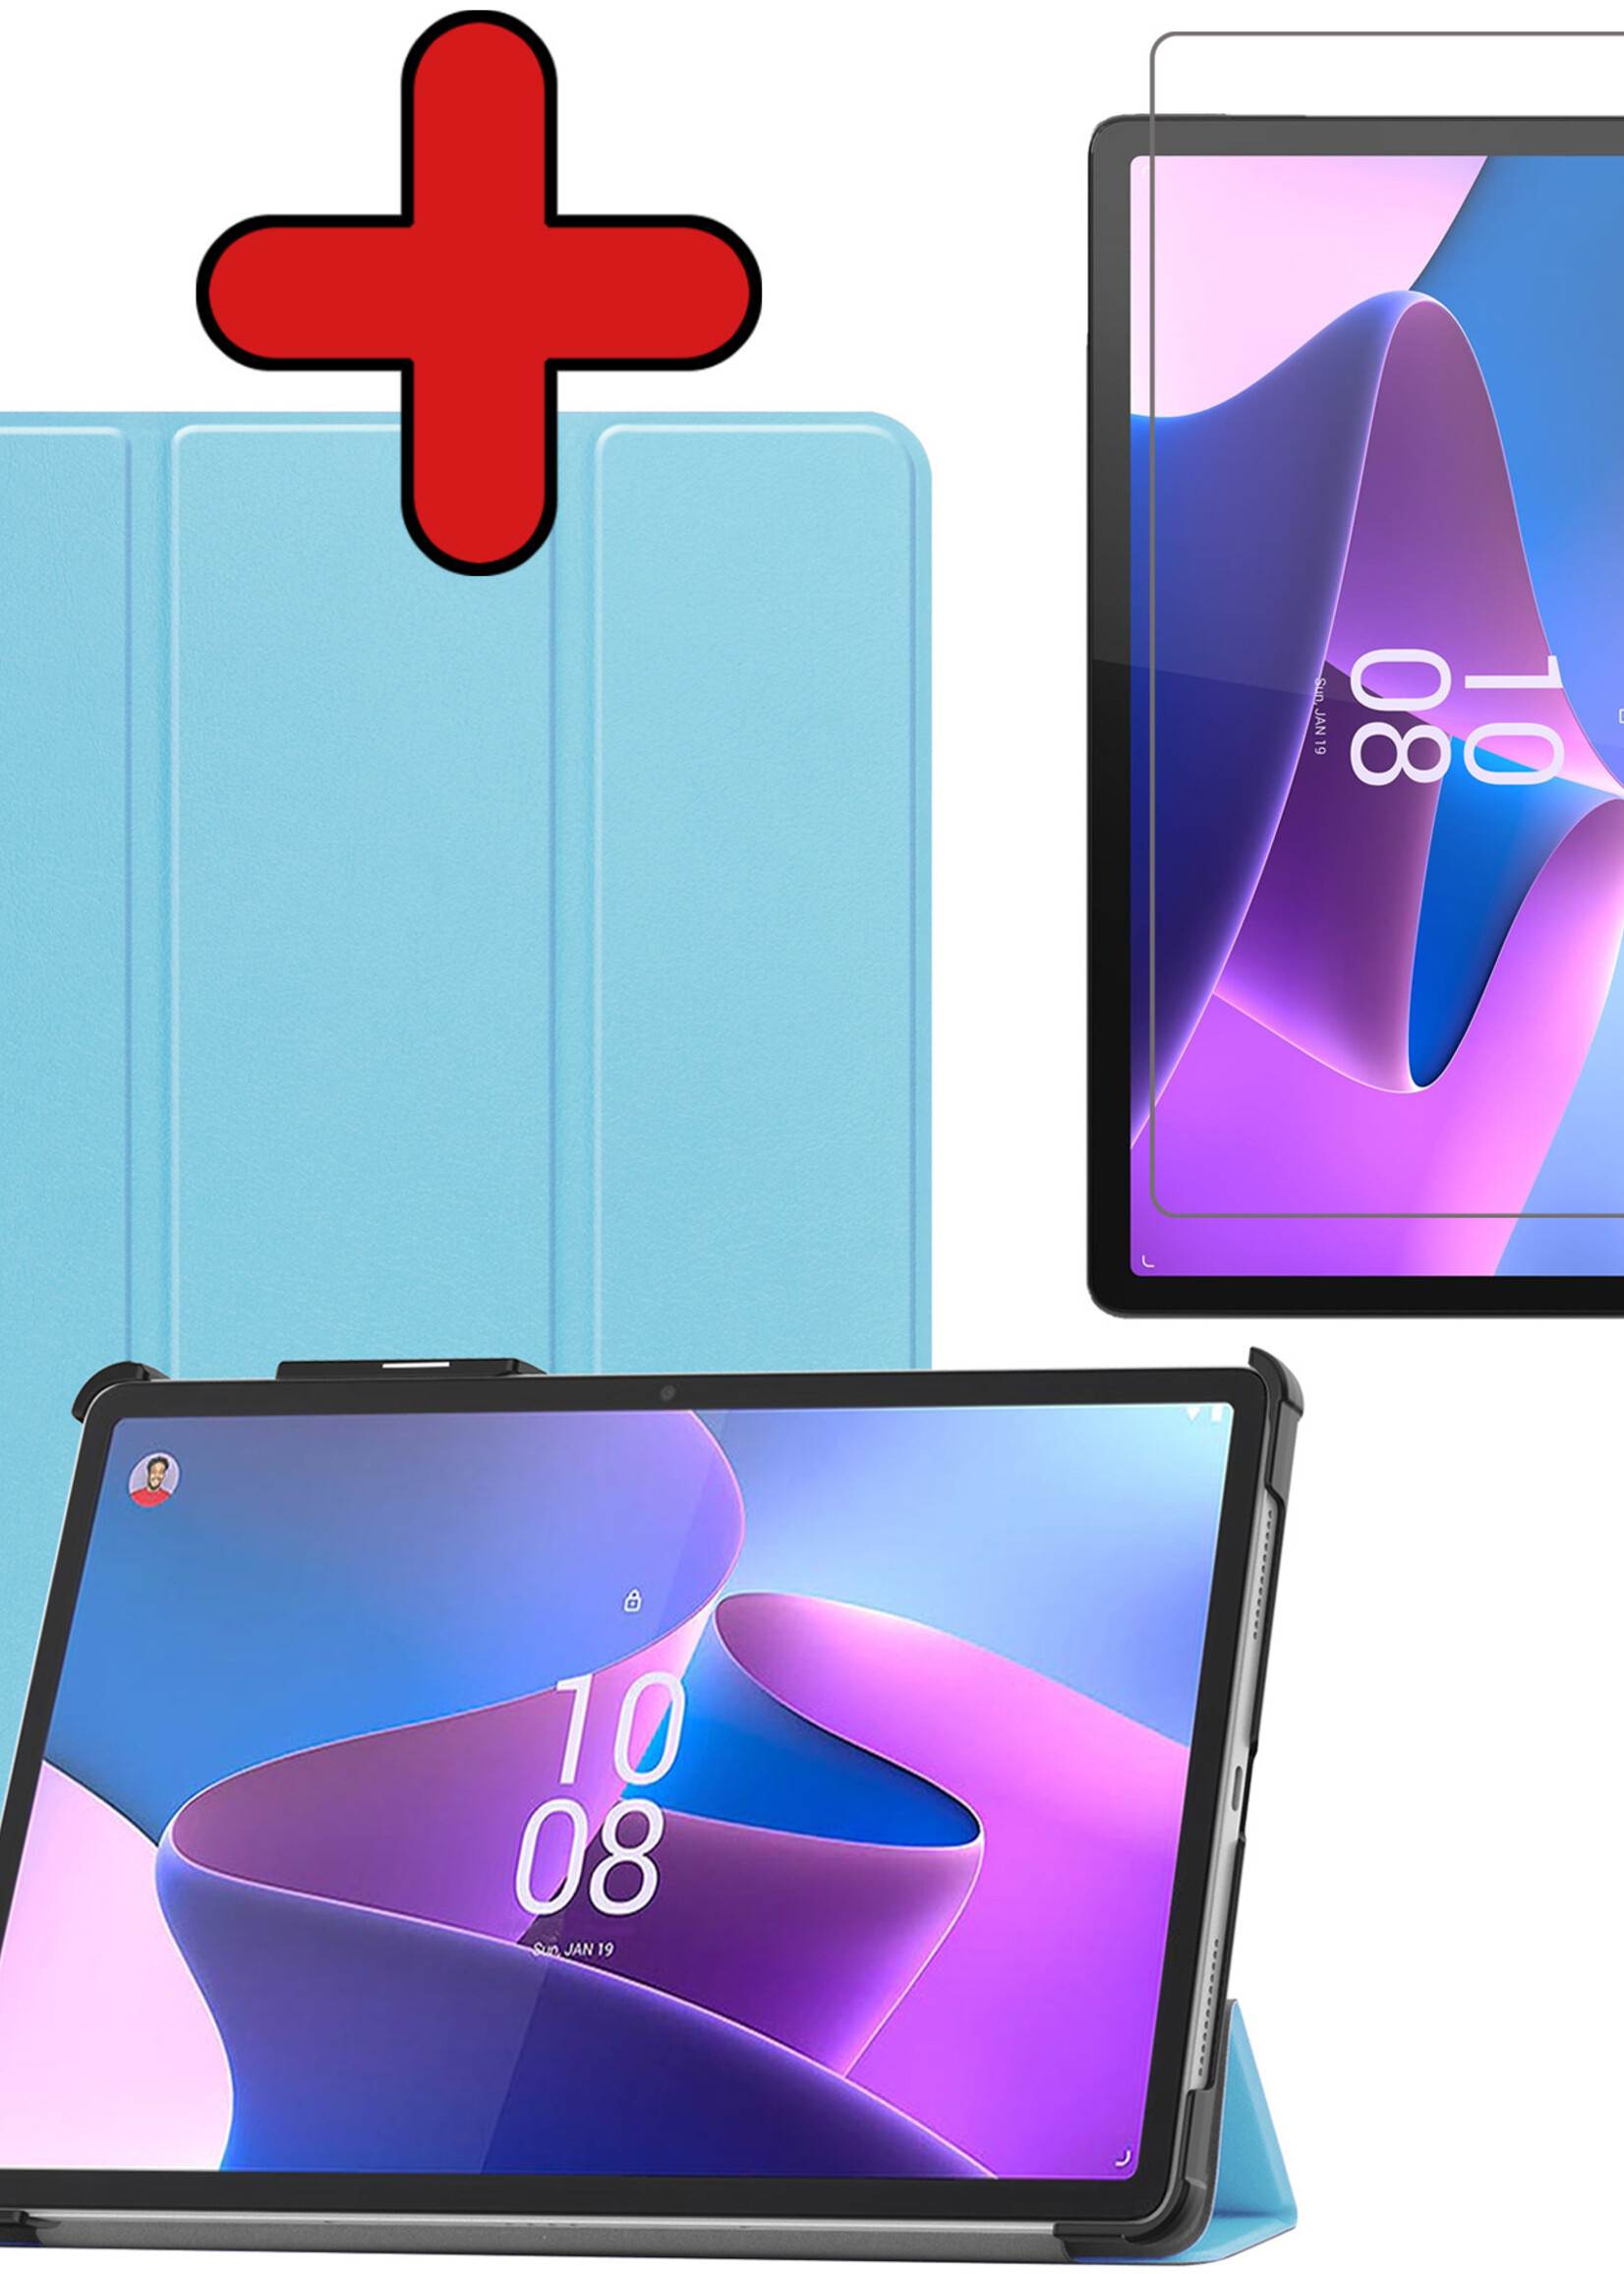 BTH Hoes Geschikt voor Lenovo Tab P11 Pro Hoes Book Case Hoesje Trifold Cover Met Uitsparing Geschikt voor Lenovo Pen Met Screenprotector - Hoesje Geschikt voor Lenovo Tab P11 Pro Hoesje Bookcase - Lichtblauw